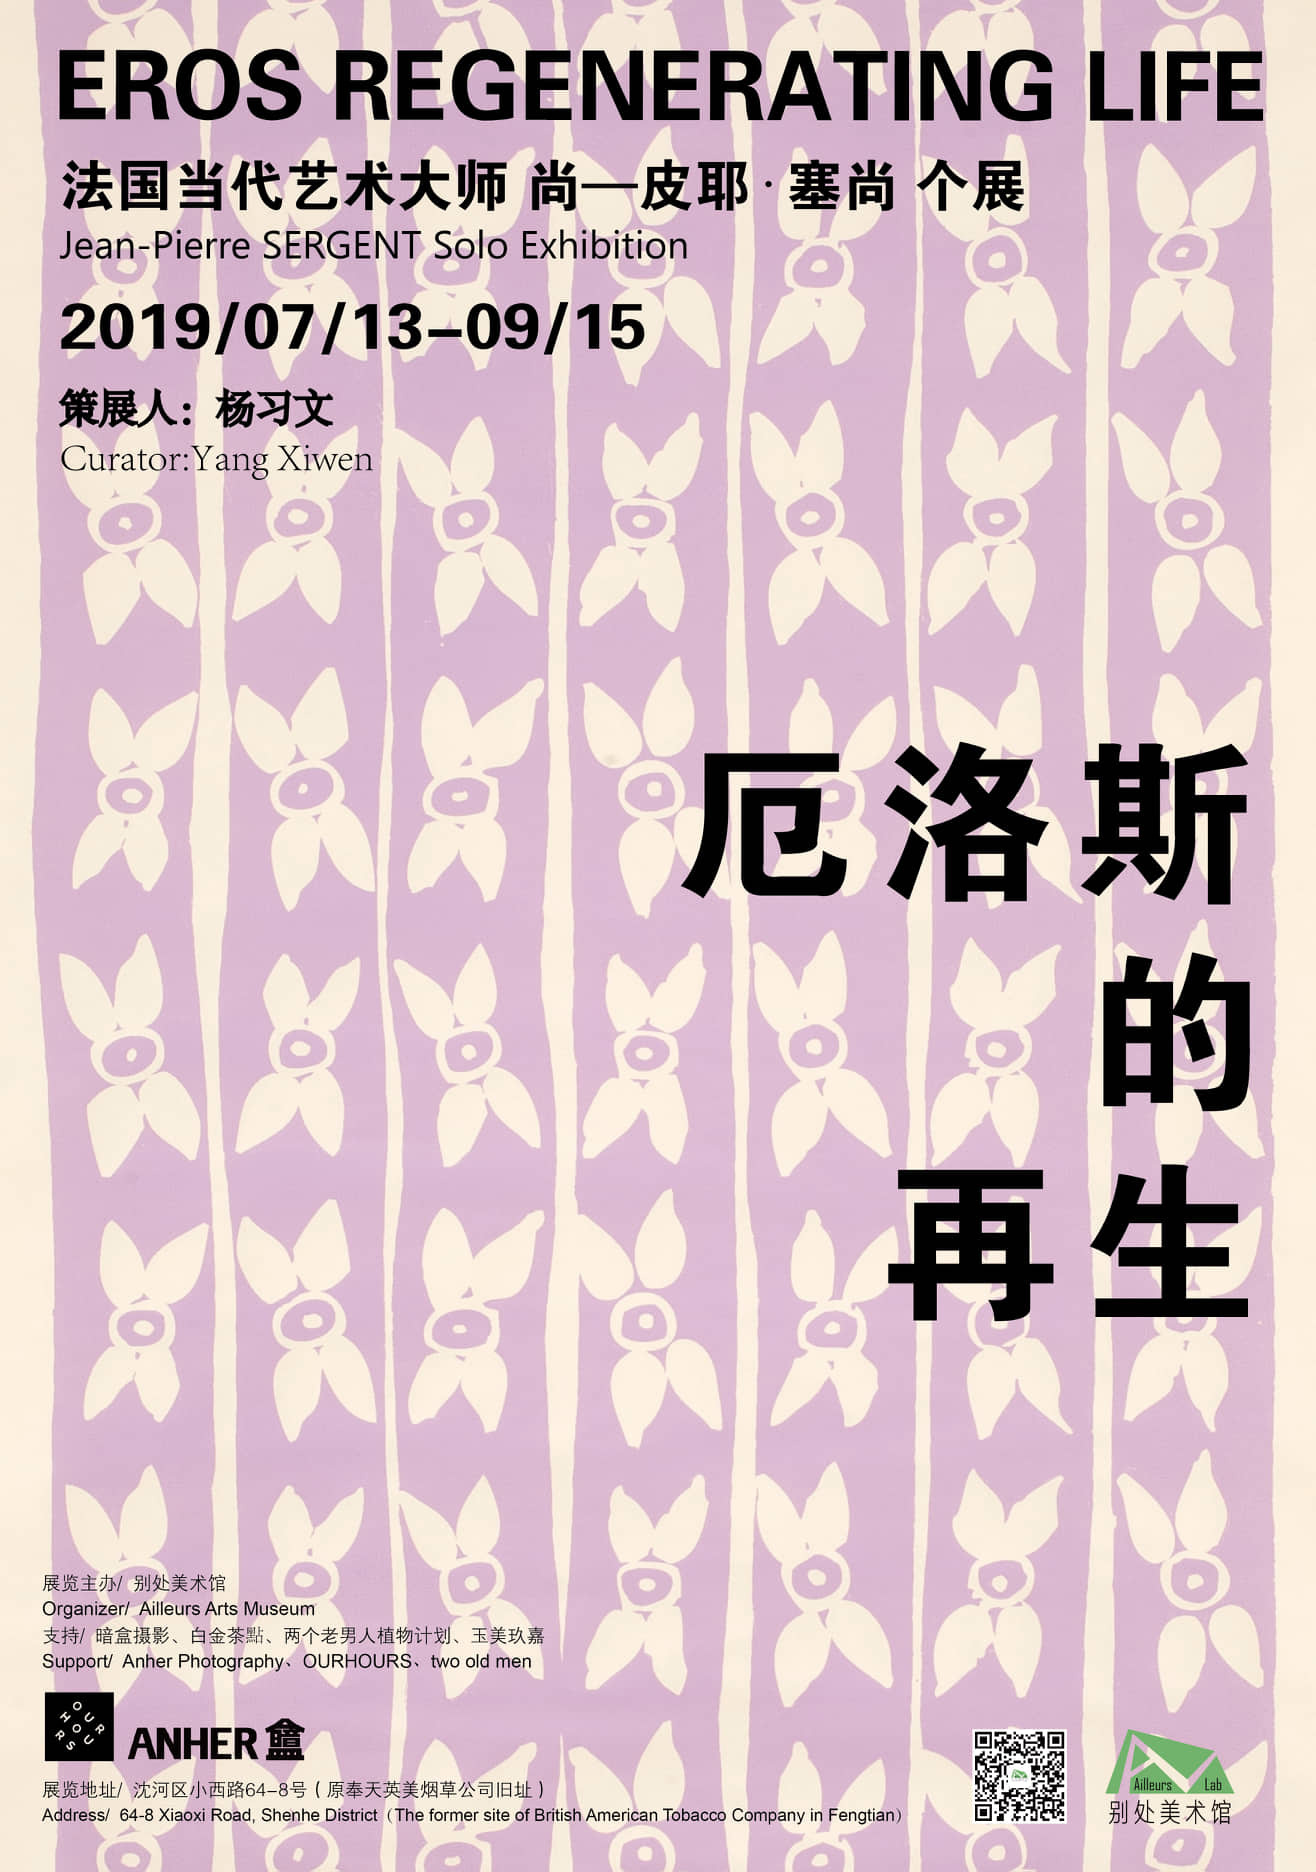 Jean-Pierre Sergent, SOLO ART EXHIBITION OF WORKS ON PAPER 'EROS REGENERATING LIFE' AILLEURS ARTS MUSEUM | SHENYANG | CHINA 13 July 2019 / 15 September 2019